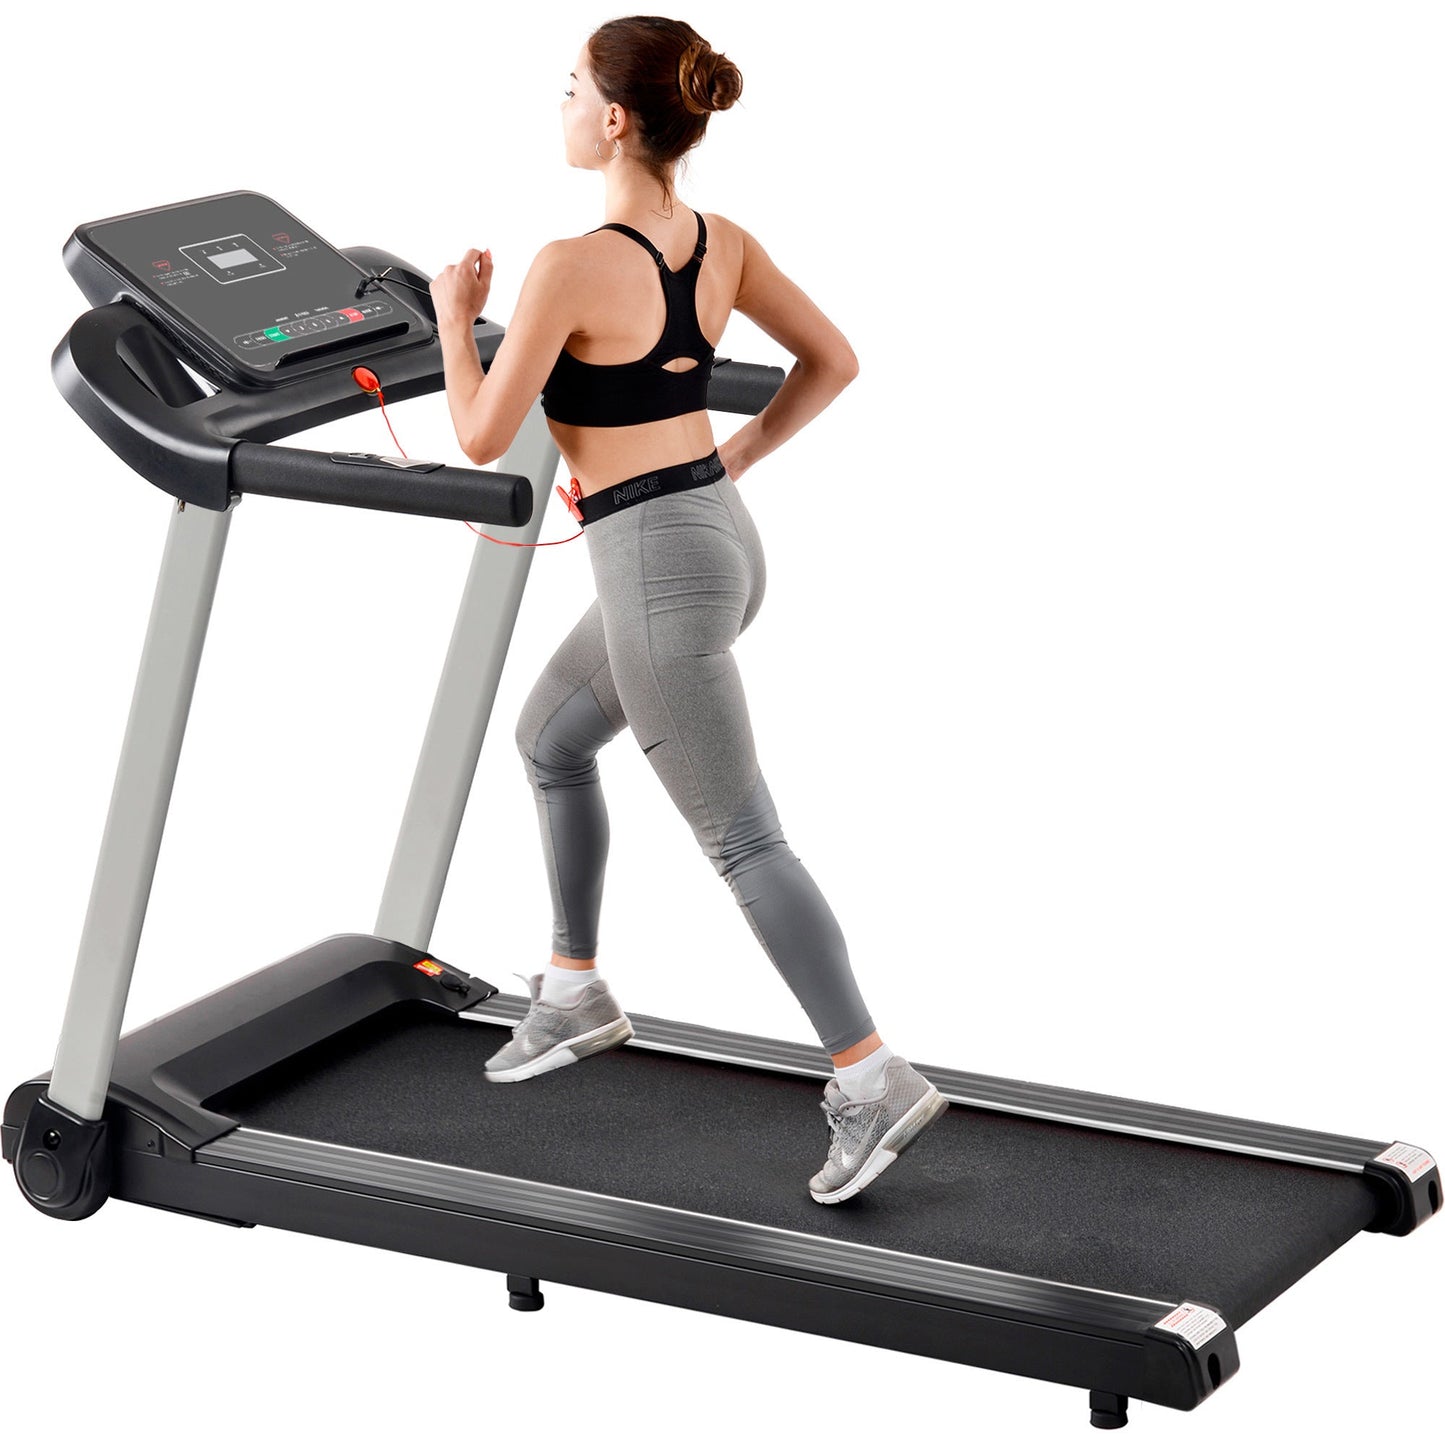 Jebscar Electric Motorized Treadmill Running Machine for Home Gym with 12 Pre Set Programs, Heart Pulse Monitor and Speaker